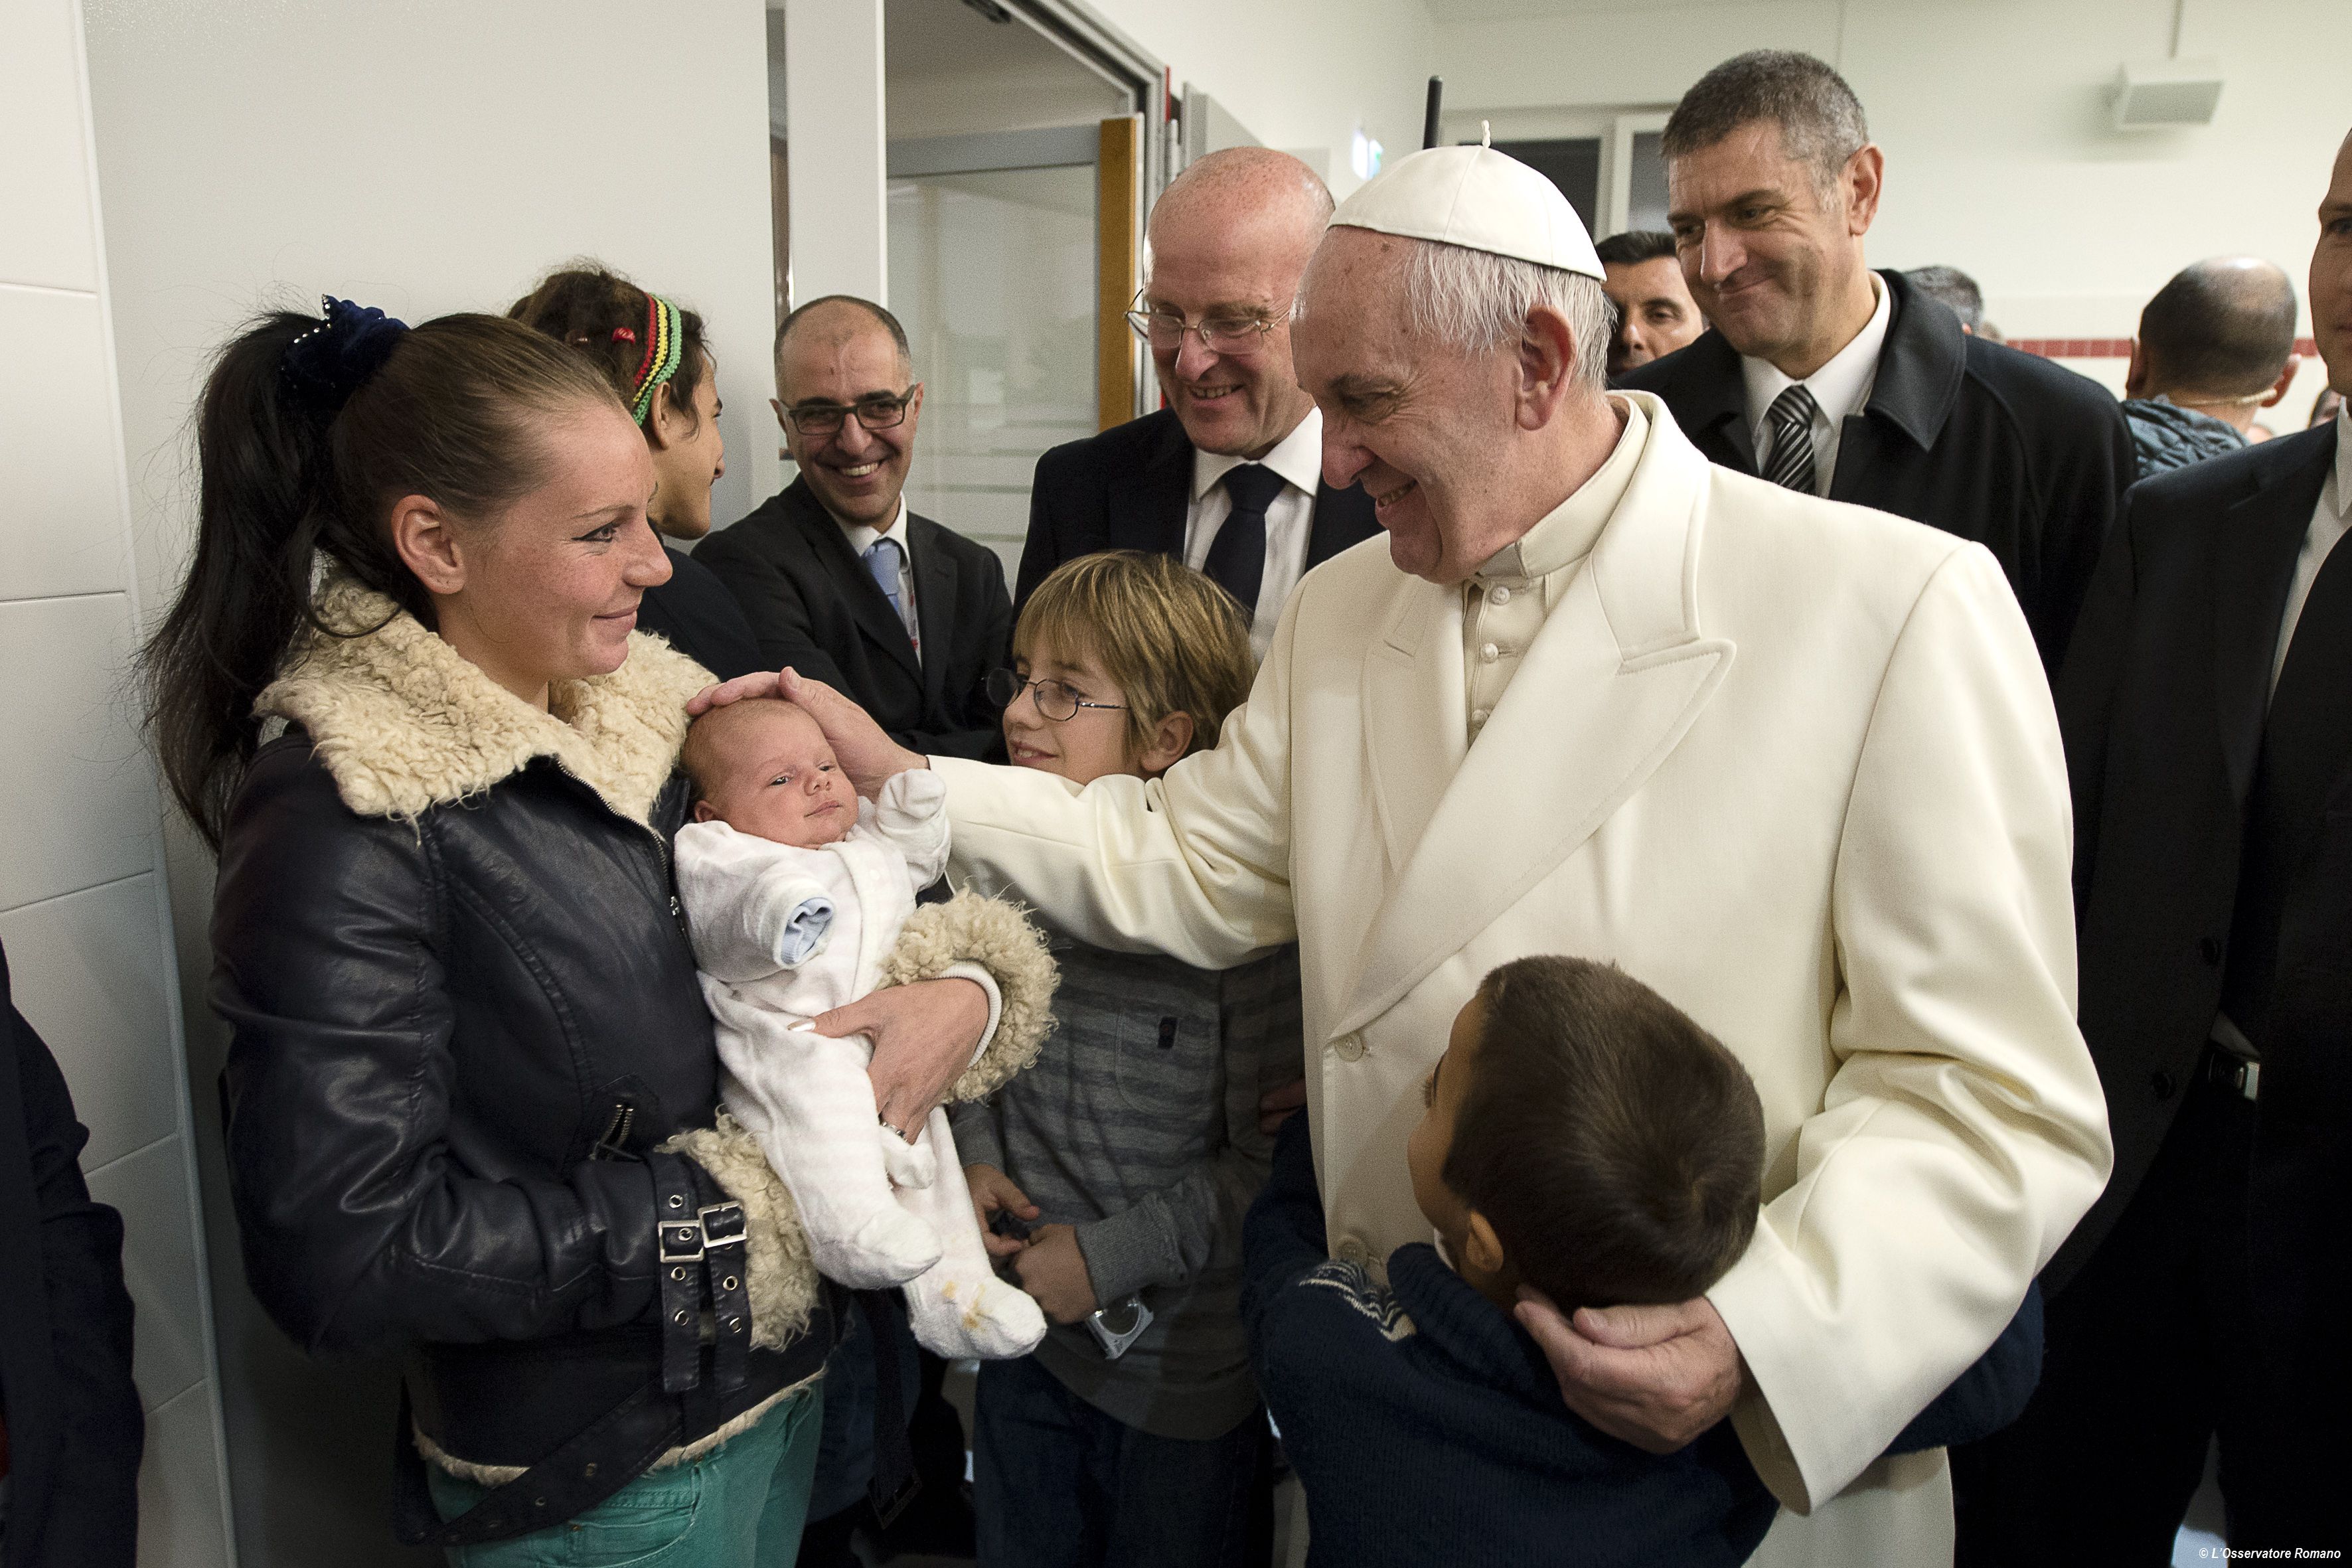 Opening of the Holy Door at a new shelter for homeless in in Rome’s Termini – John Paul II train station